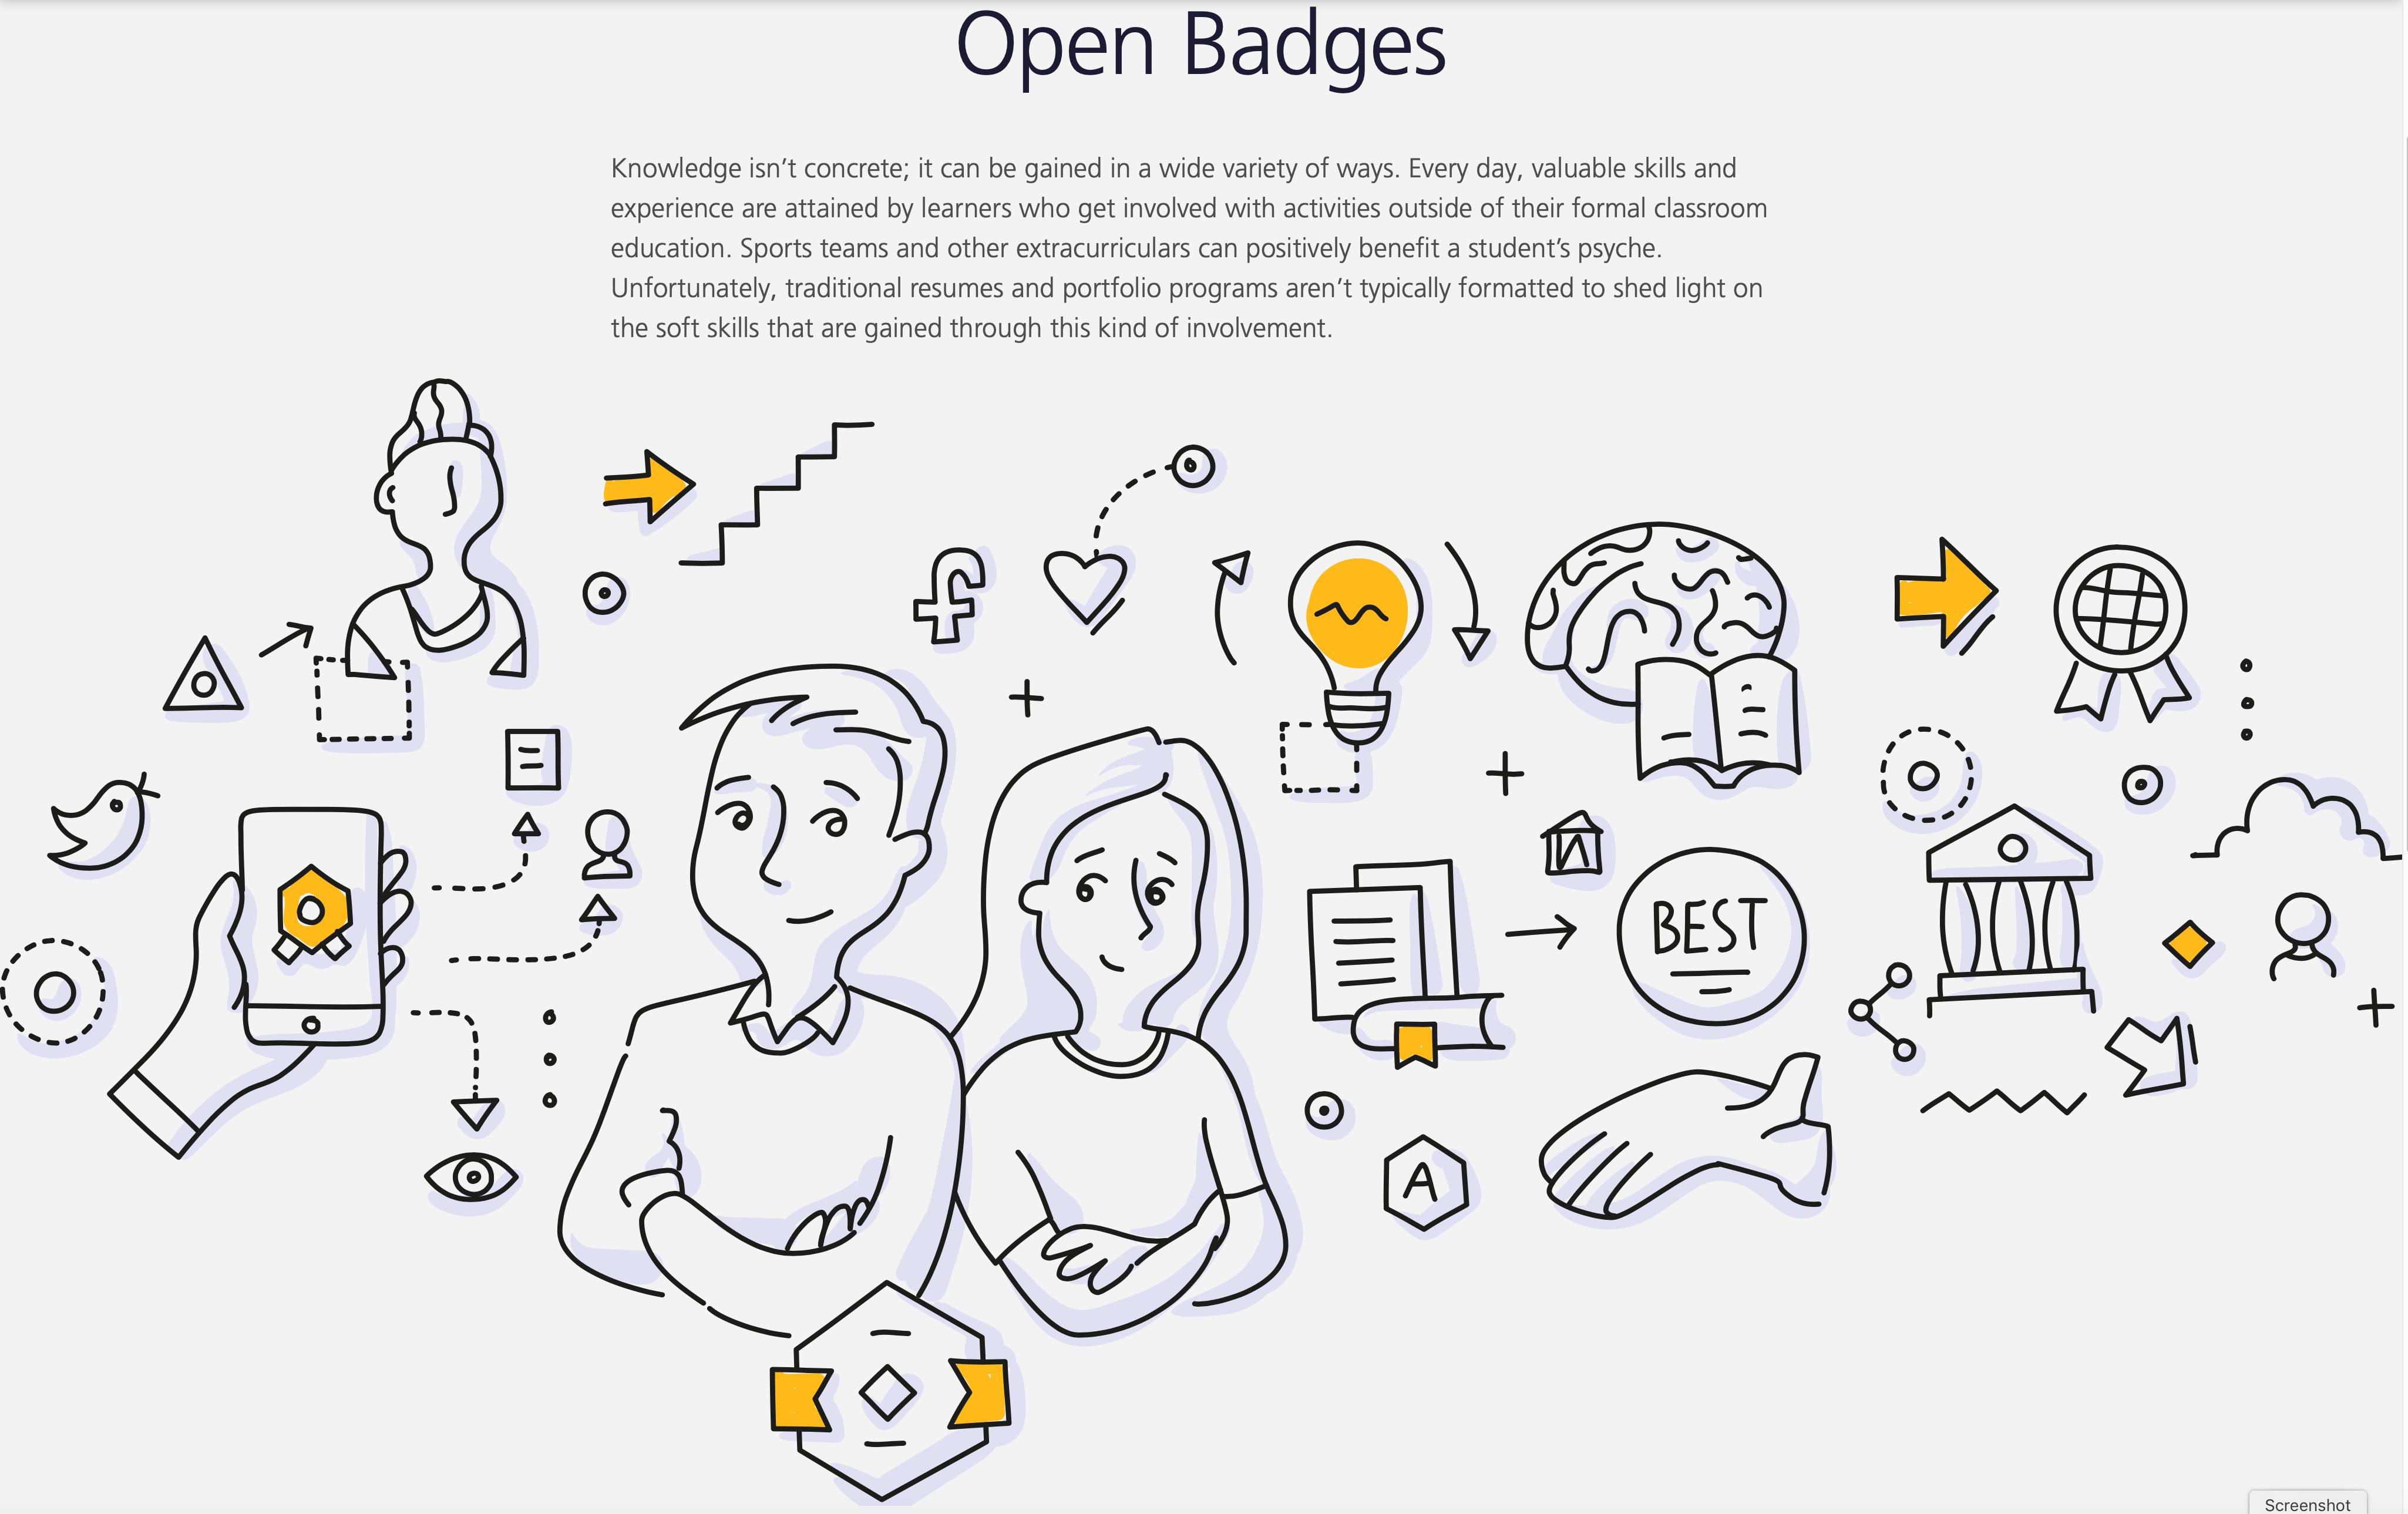 An image showcasing open badge concepts. The explanation reads: Knowledge isn't concrete; it can be gained in a wide variety of ways. Each day, valuable skills and expereince are attained by learners who get involved with activities outside of their formal classroom education. Sports teams and other extracurriculars can positively benefit a student's psyche. Unfortunately, traditional resumes and portfolio programs aren't typically formatted to shed light on the soft skills that are gained through this kind of involvement..